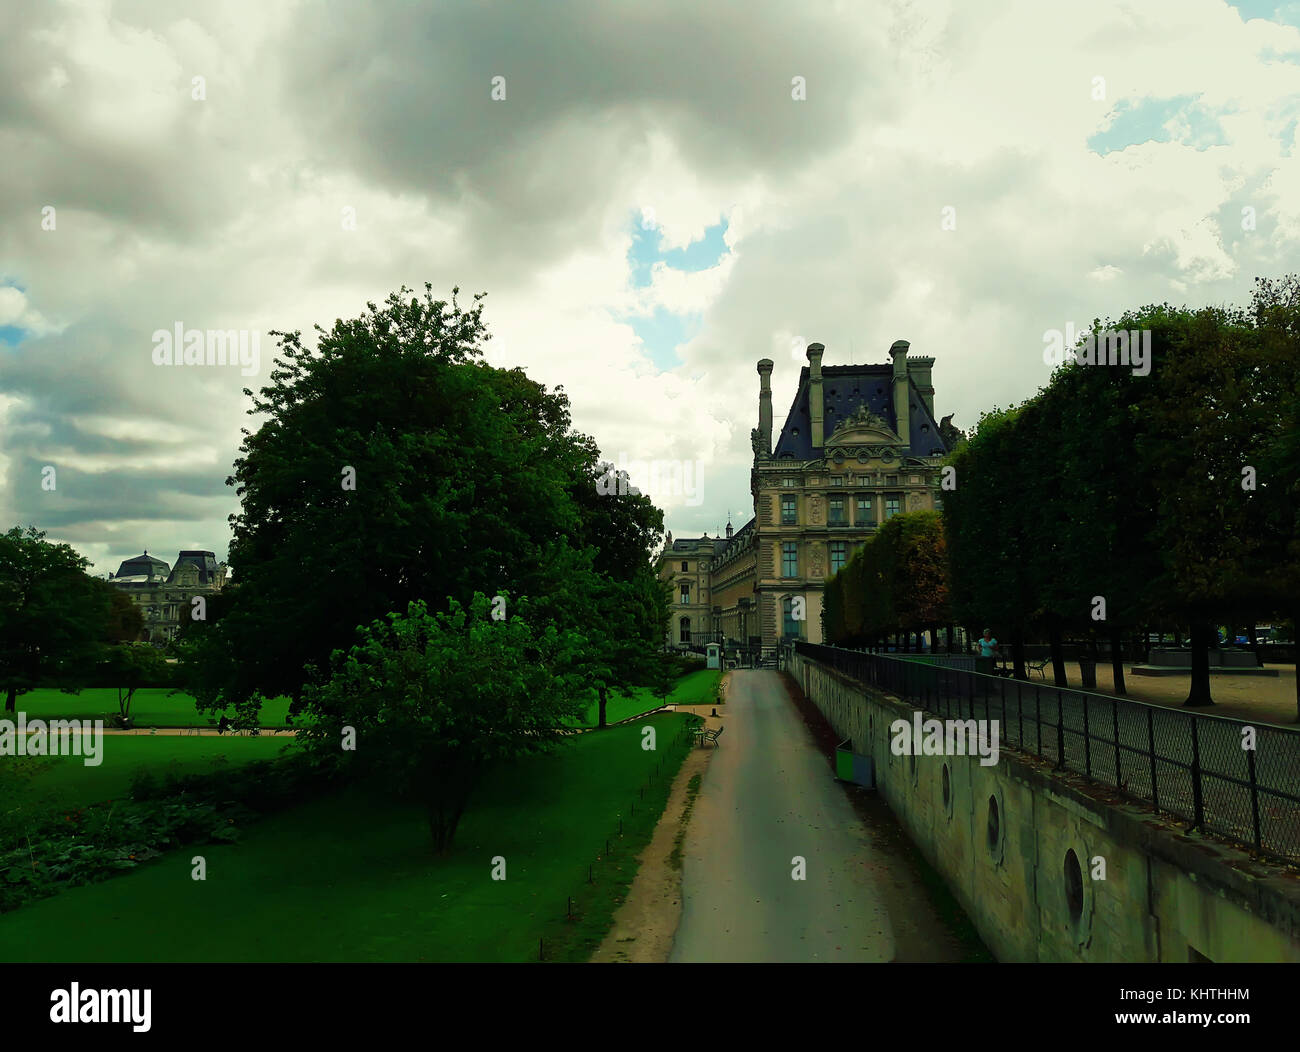 Louvre palace and Tuileries garden view in Paris, France. Outdoor culture travel. Stock Photo